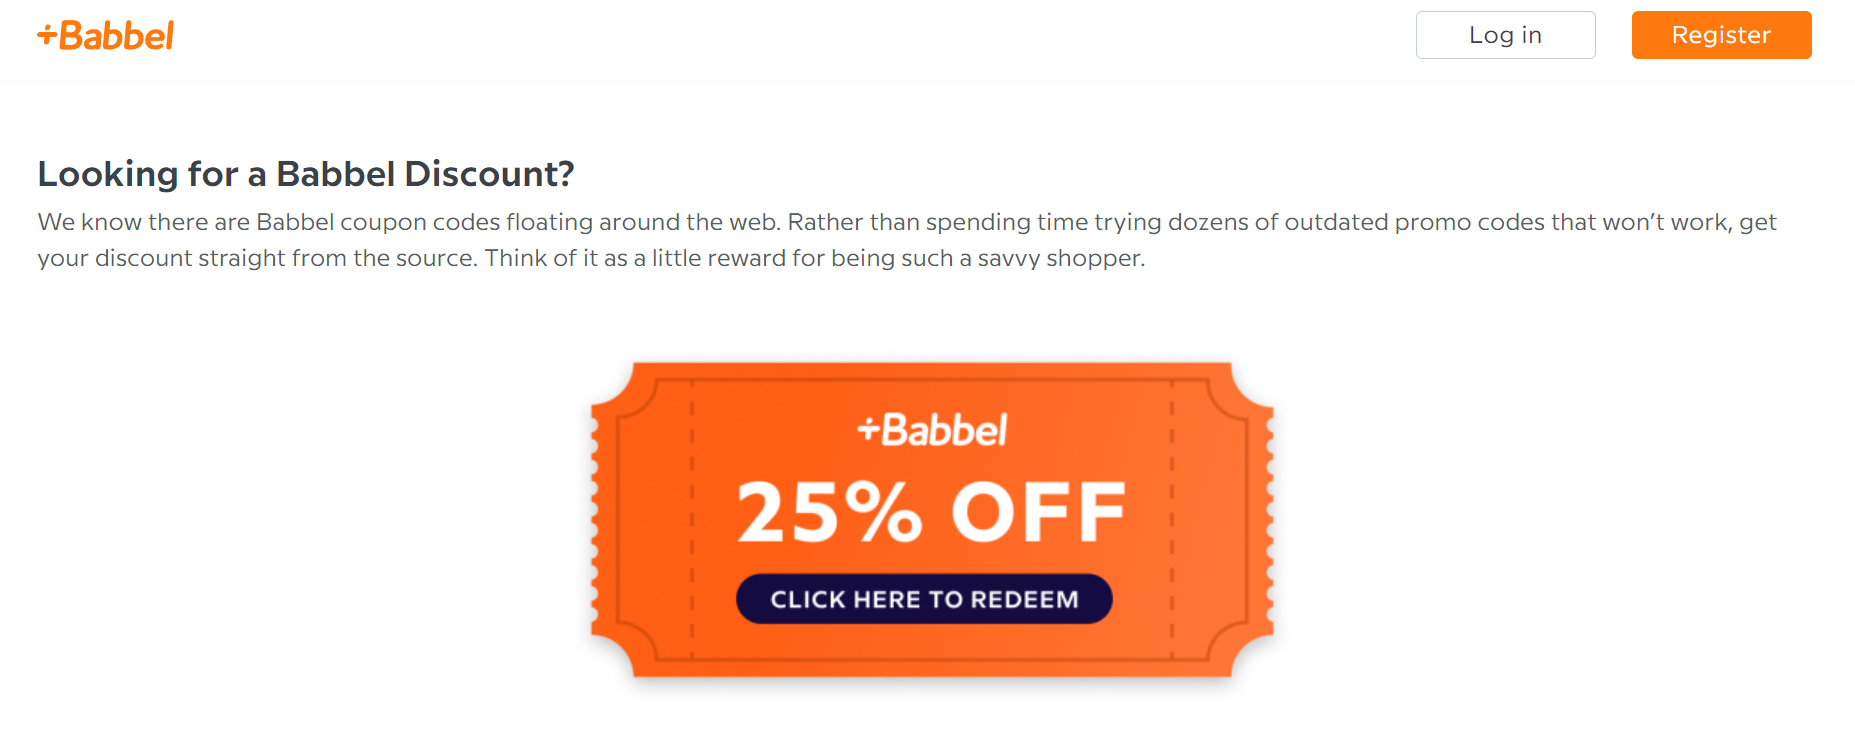 Discount on Babbel